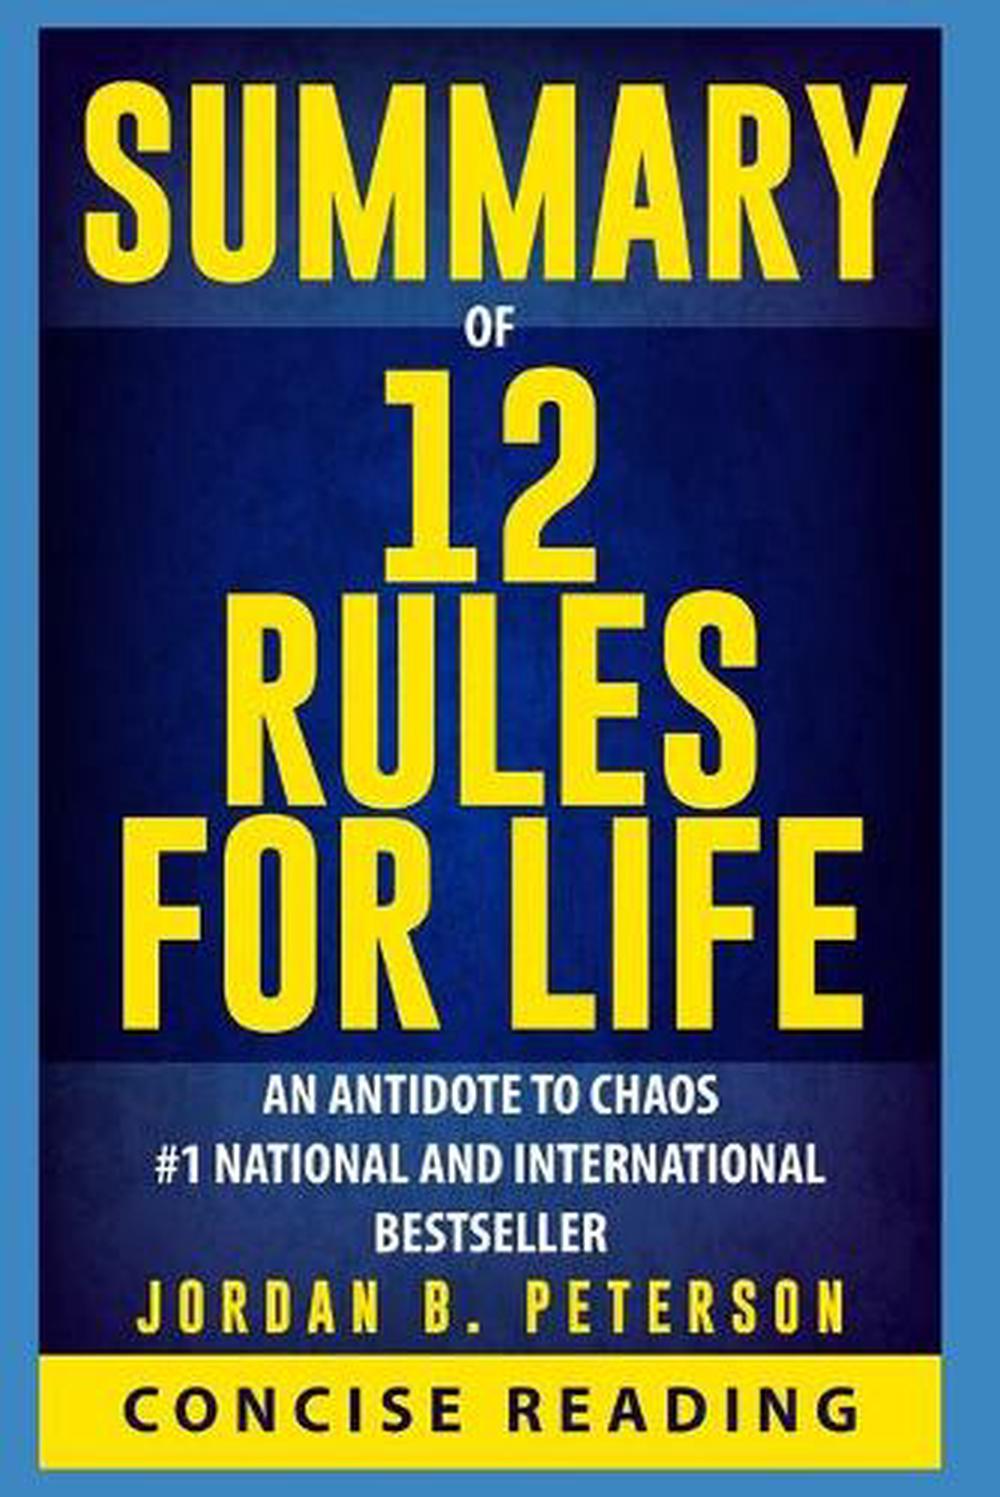 12 rules for life an antidote to chaos